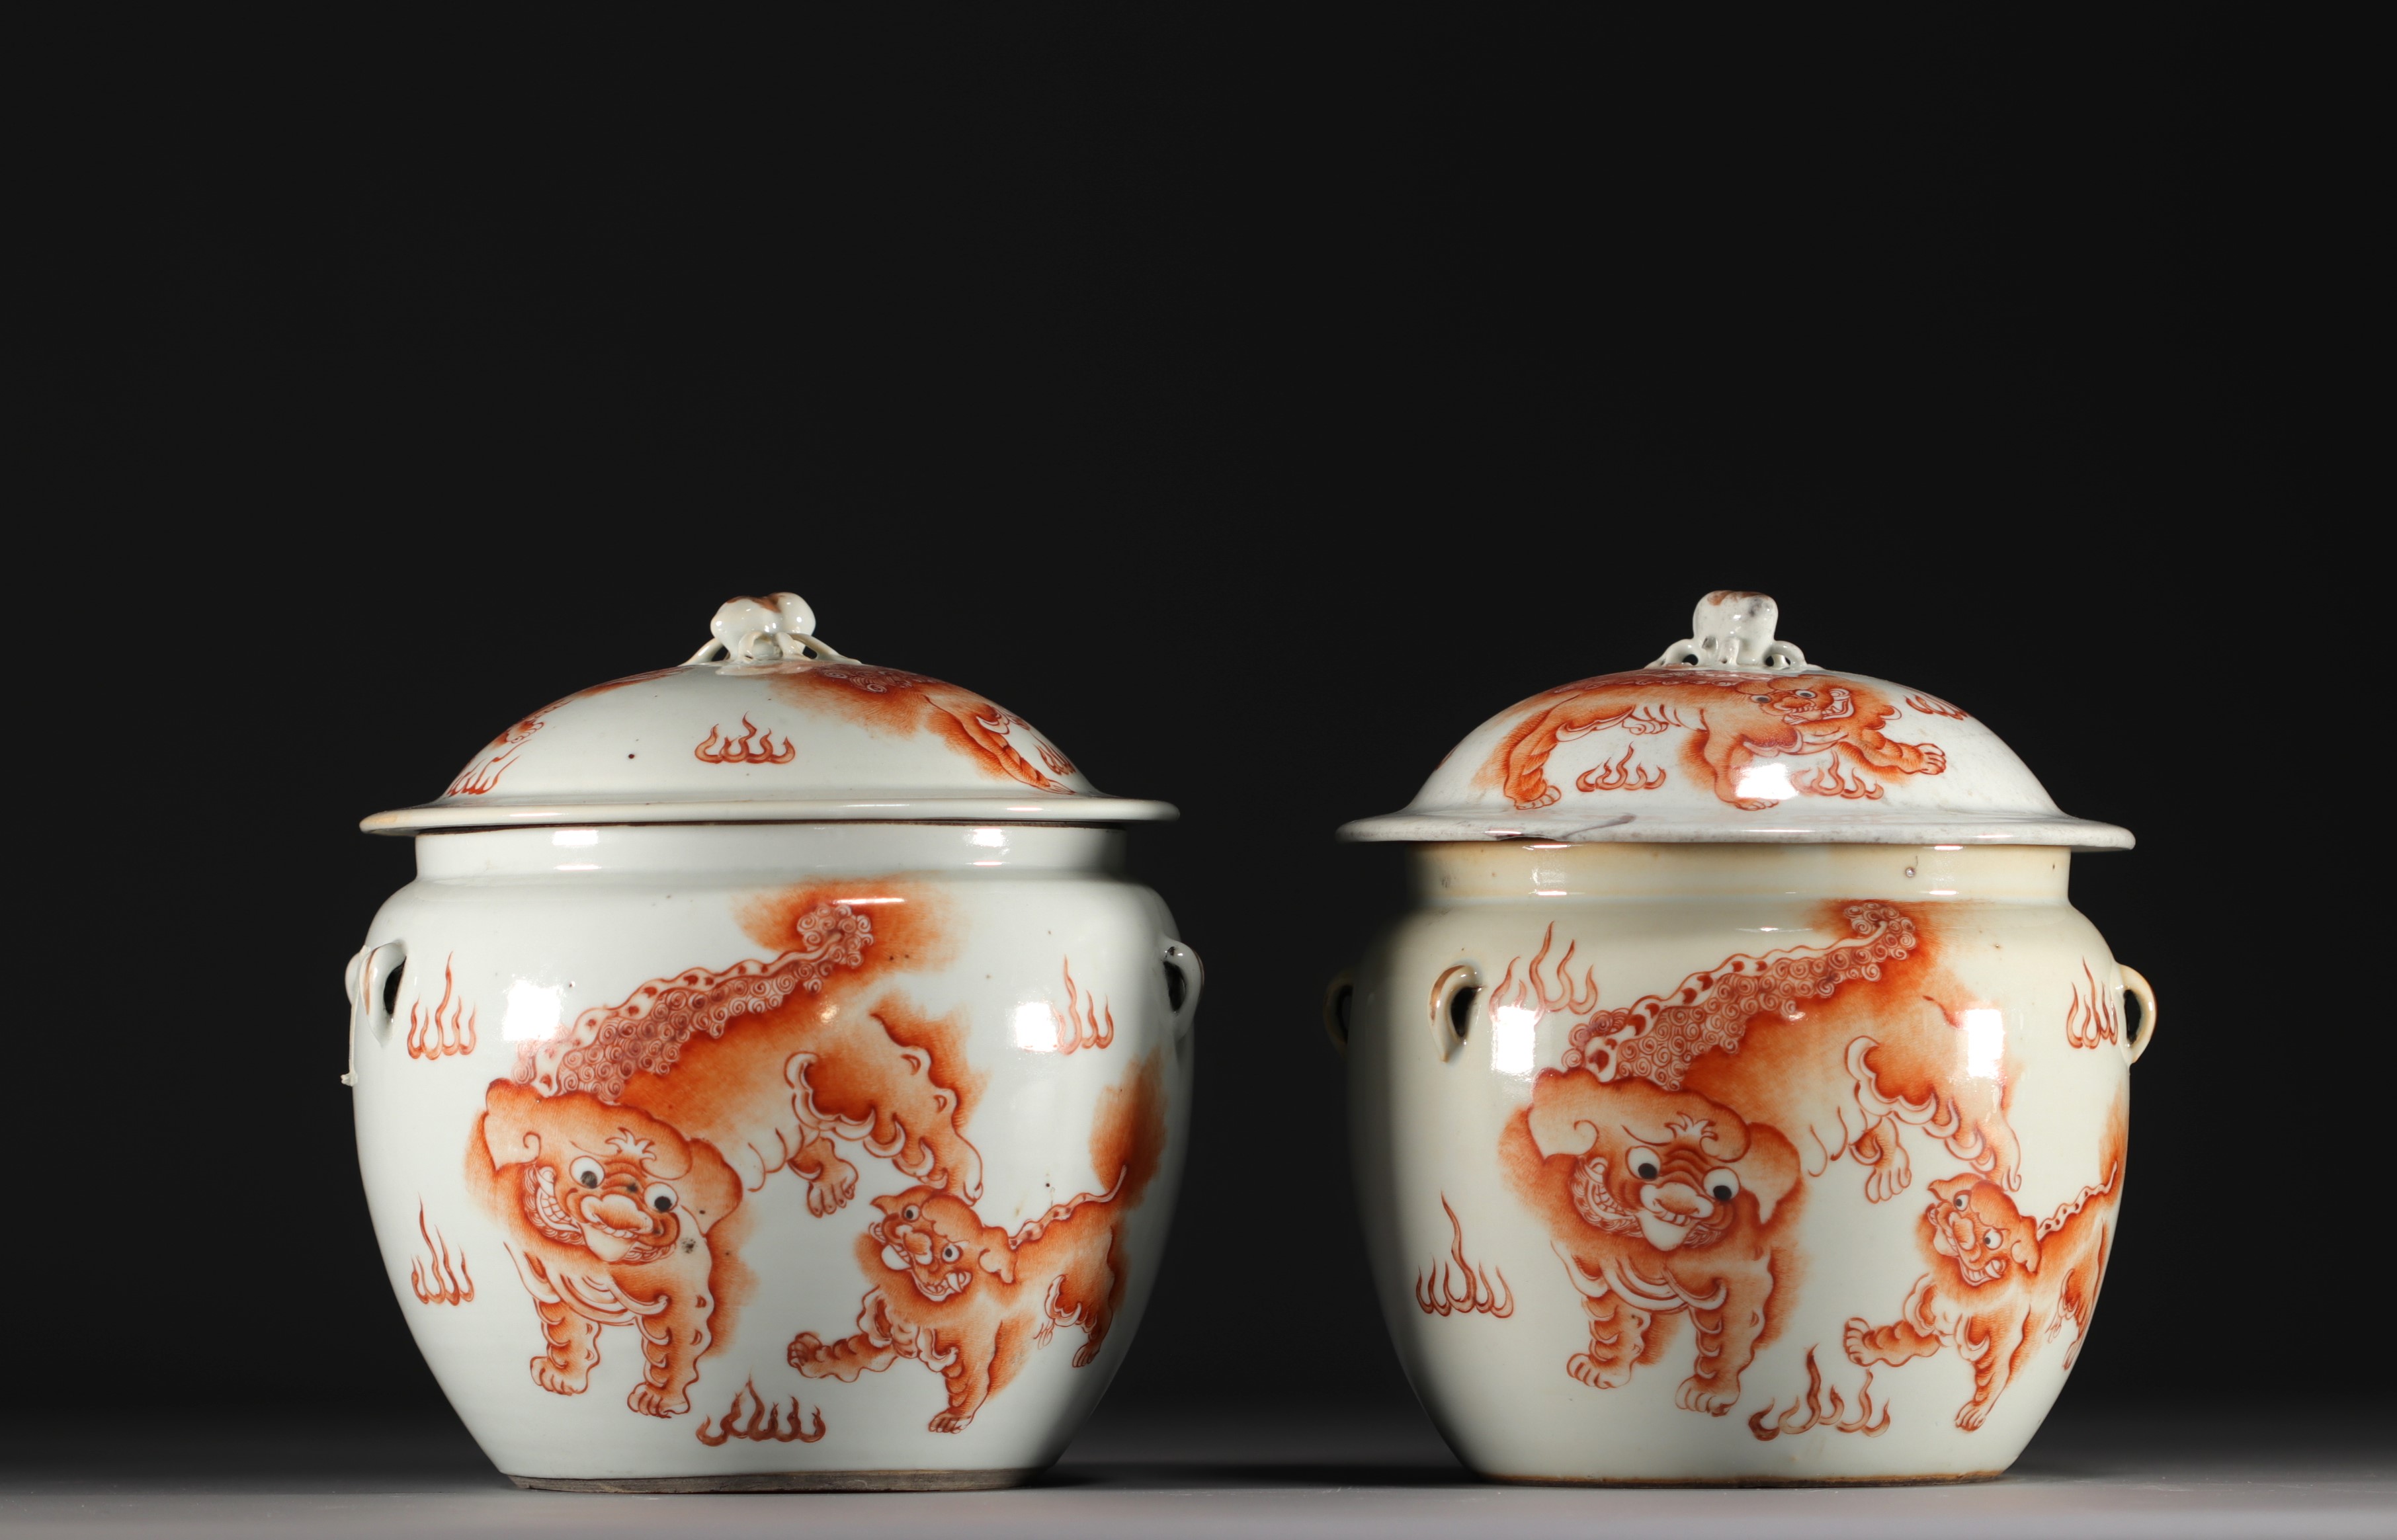 China - Pair of covered terrines decorated with iron-red lions, 19th century. - Image 3 of 4